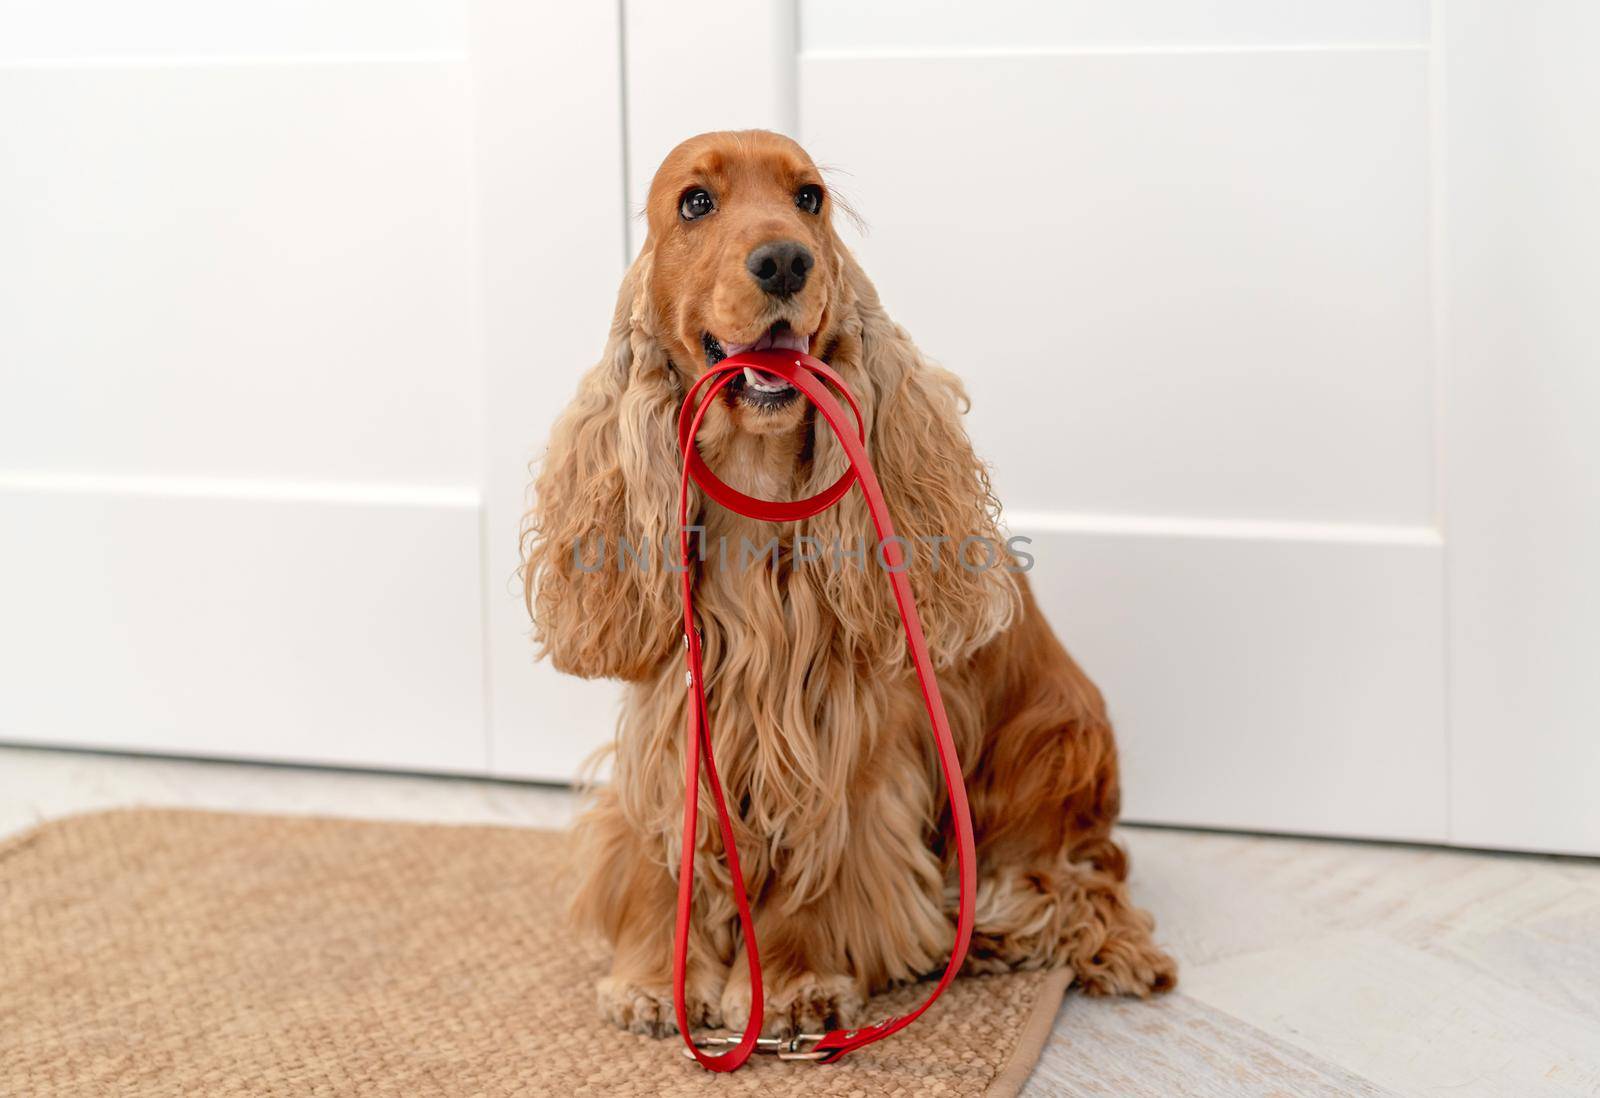 English cocker spaniel dog holding red leash and waiting for walk while sitting near door at home